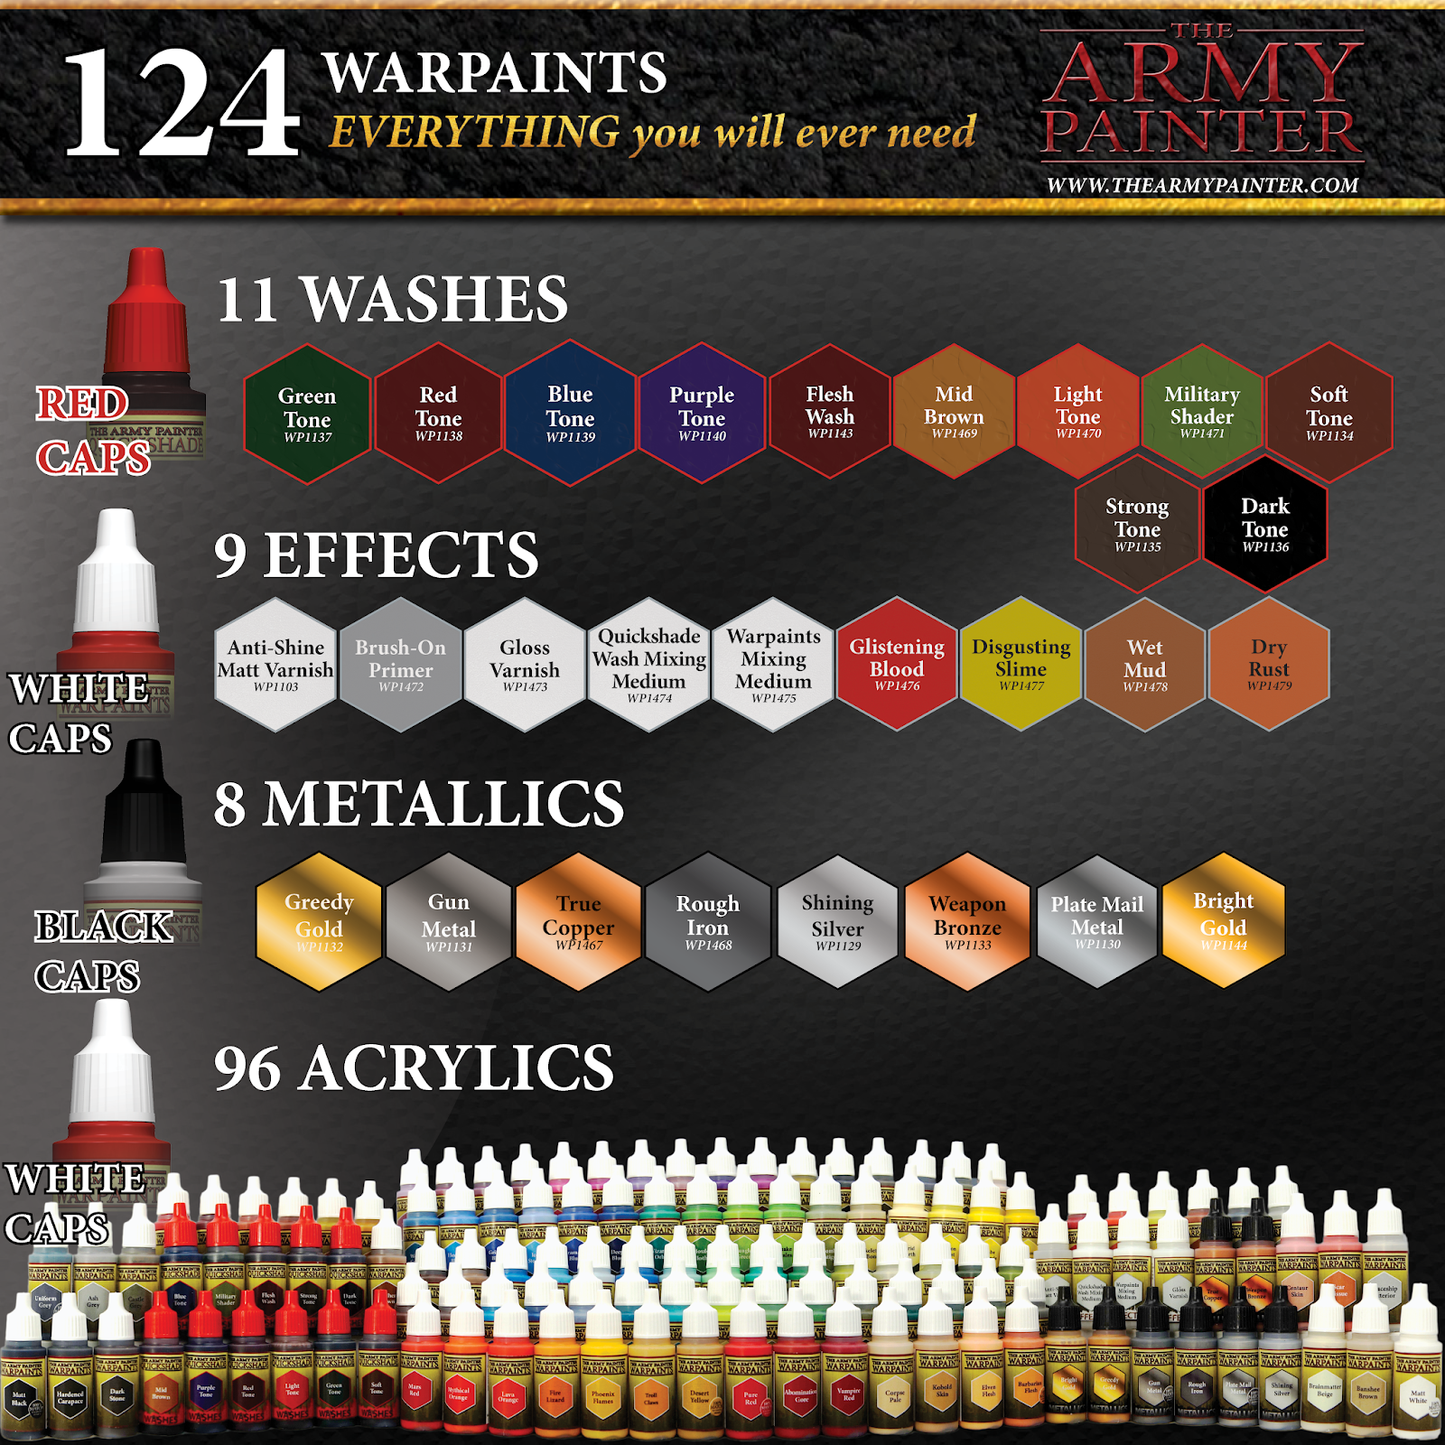 The Army painter - Warpaints Air Color Triad